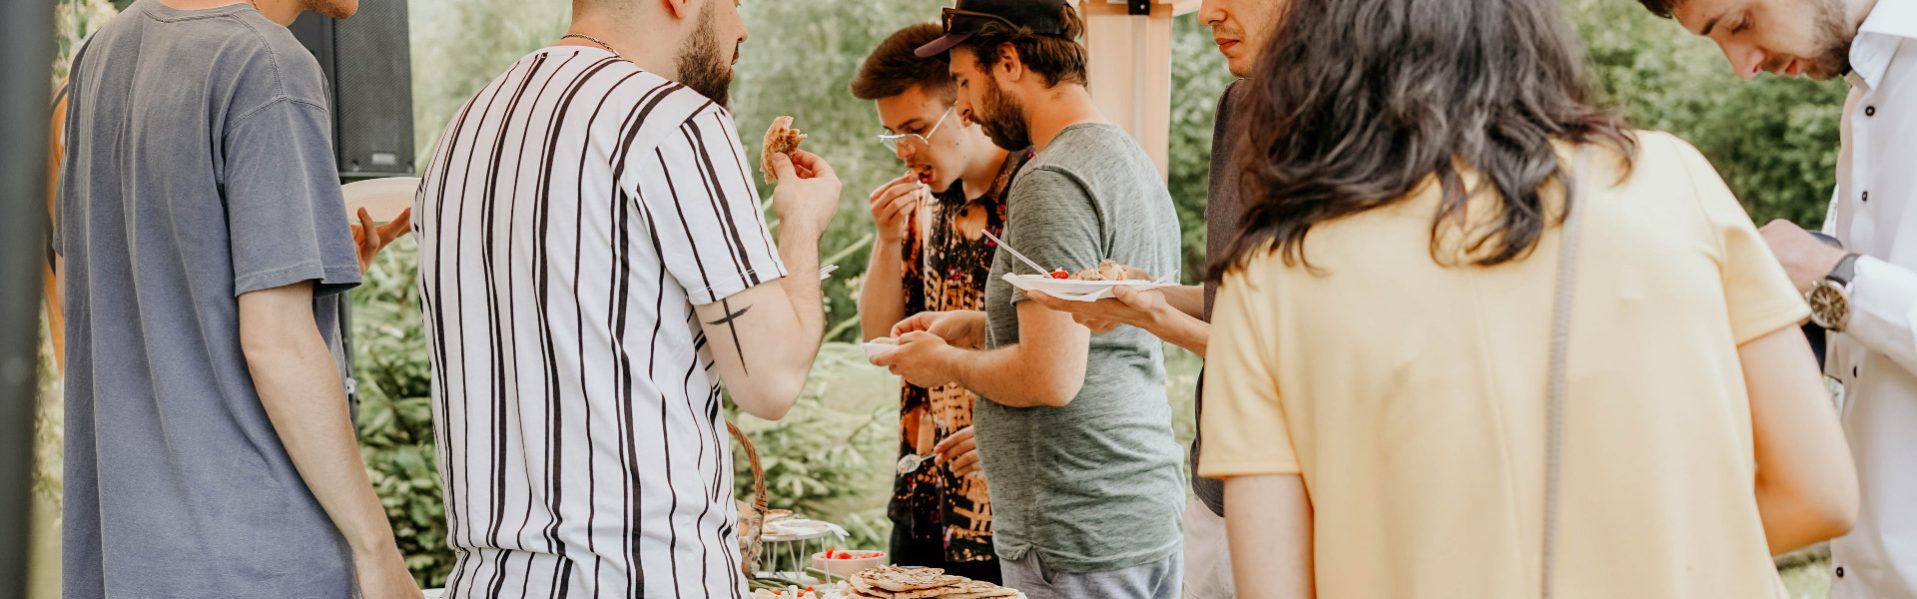 people eating food at an event